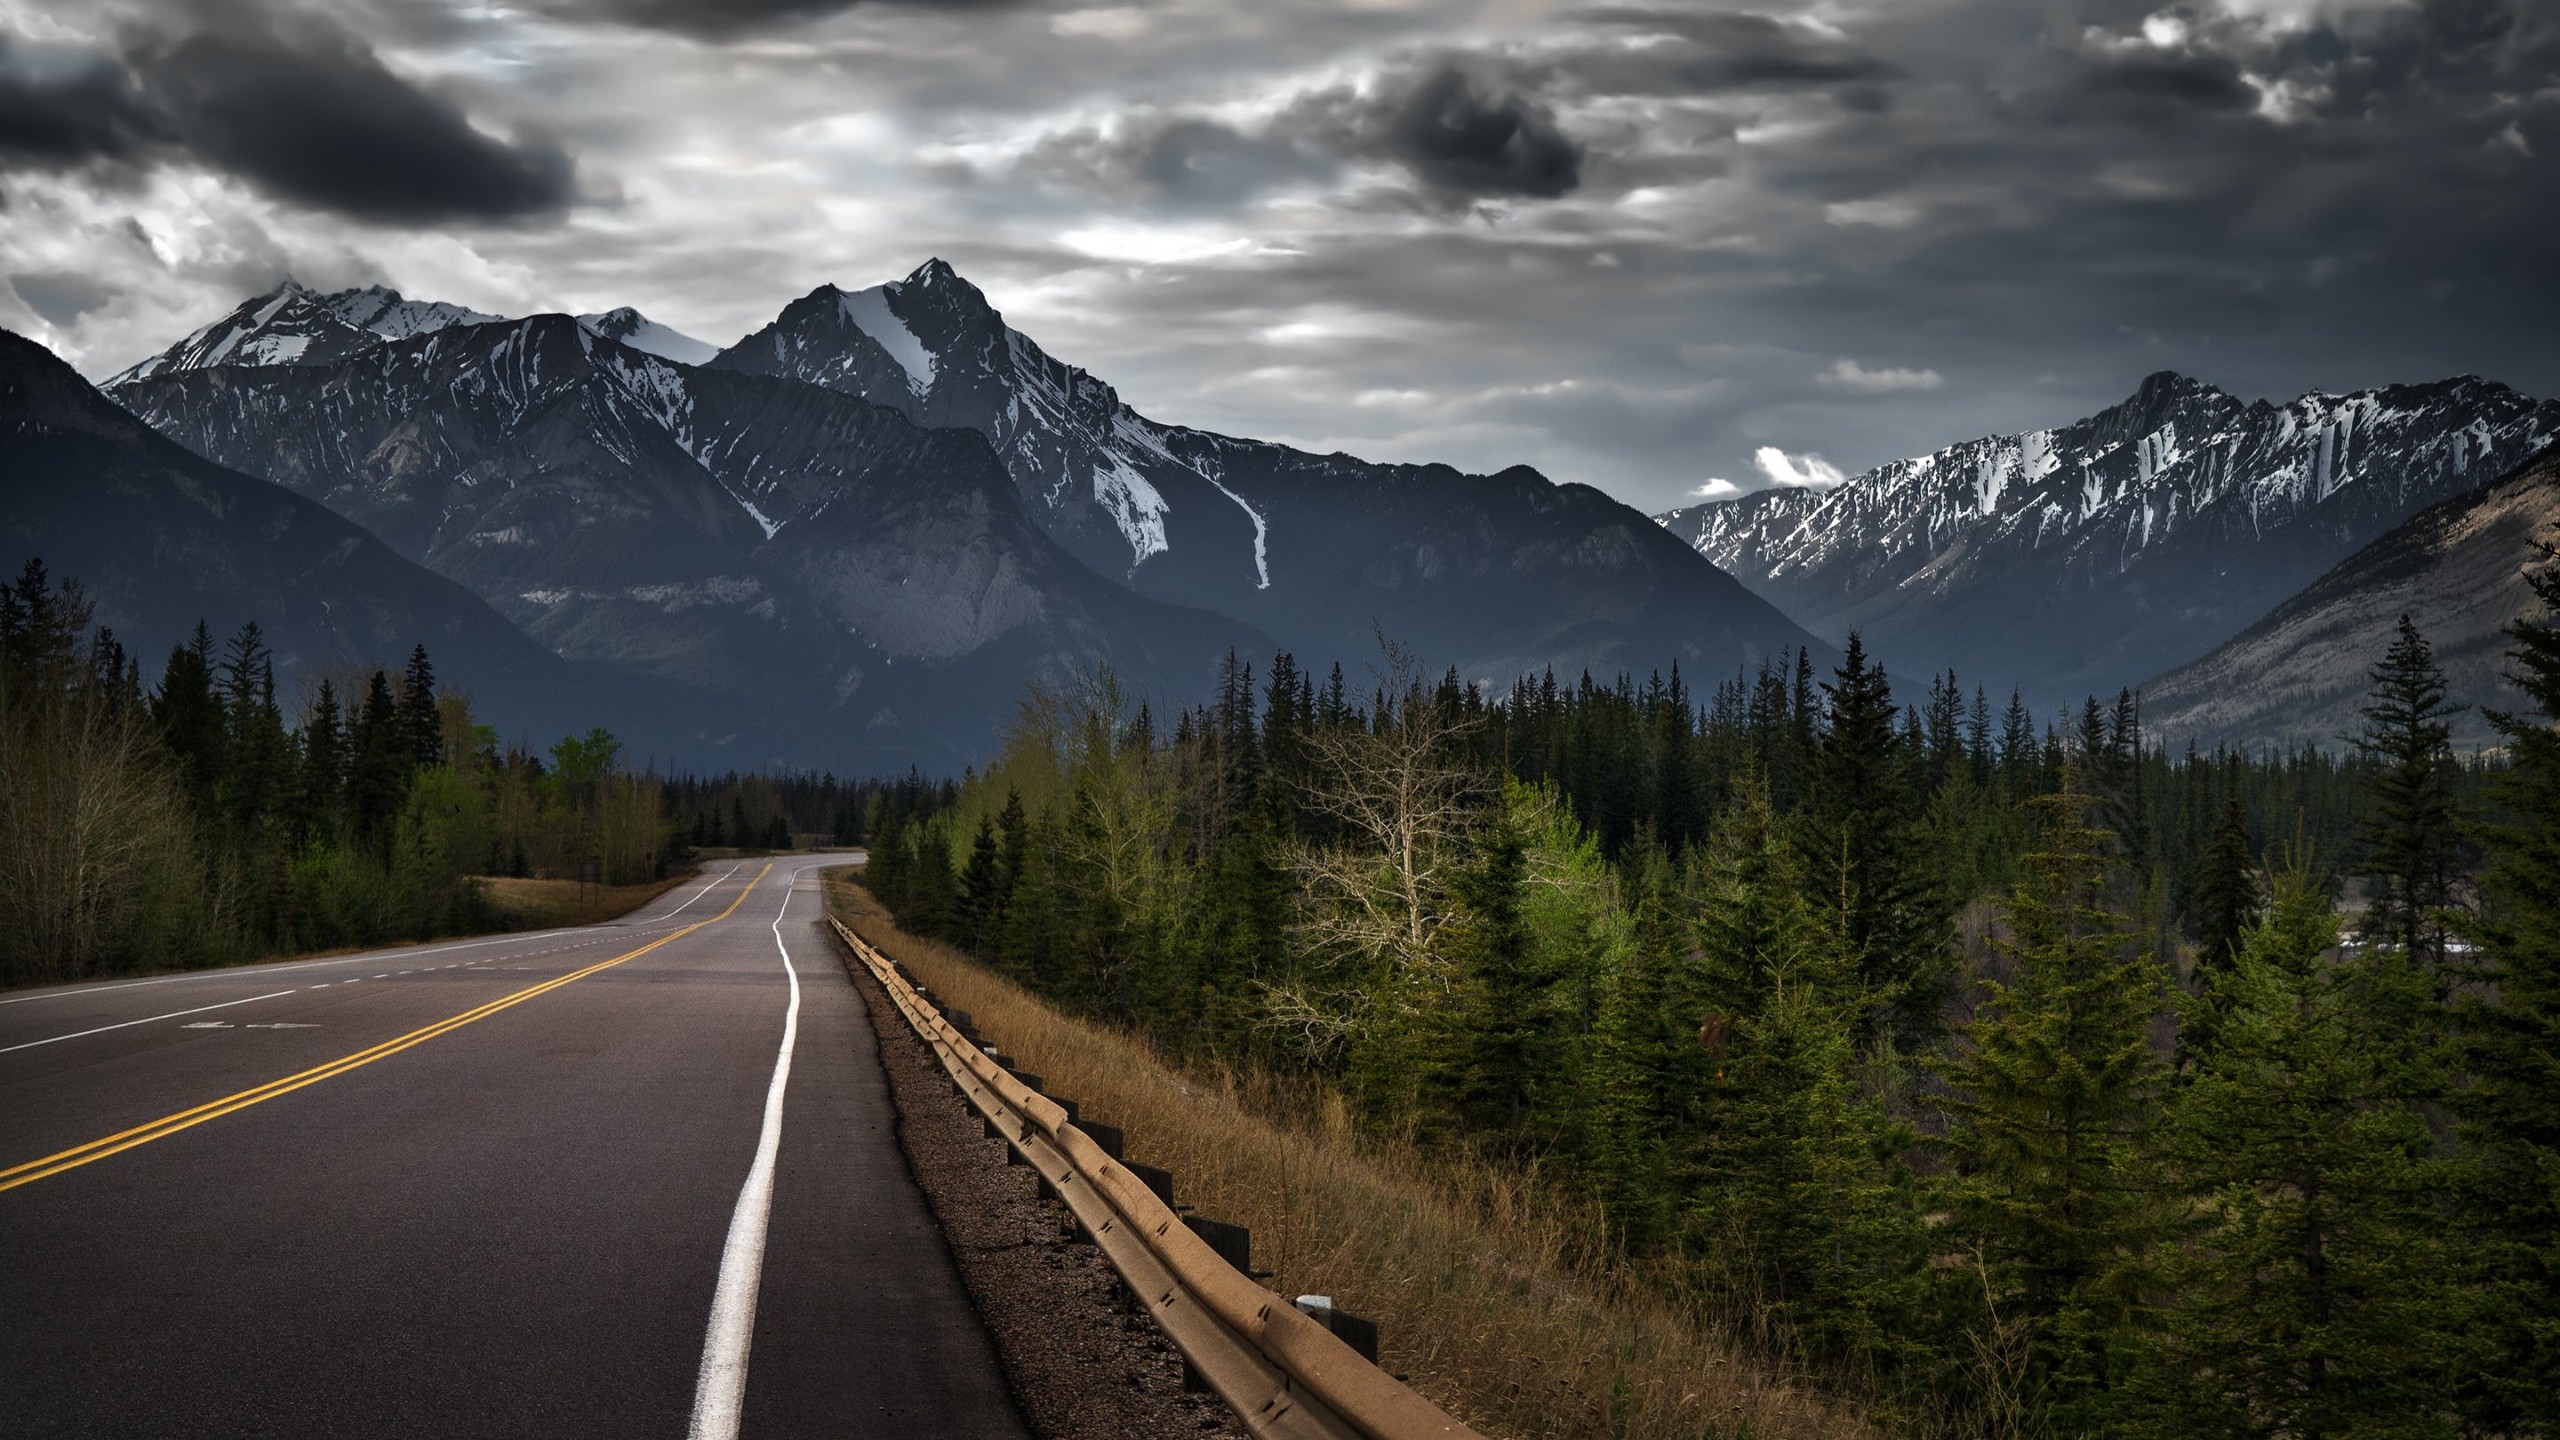 Road trip on a stormy day, Canada Wallpaper for Desktop 2560x1440